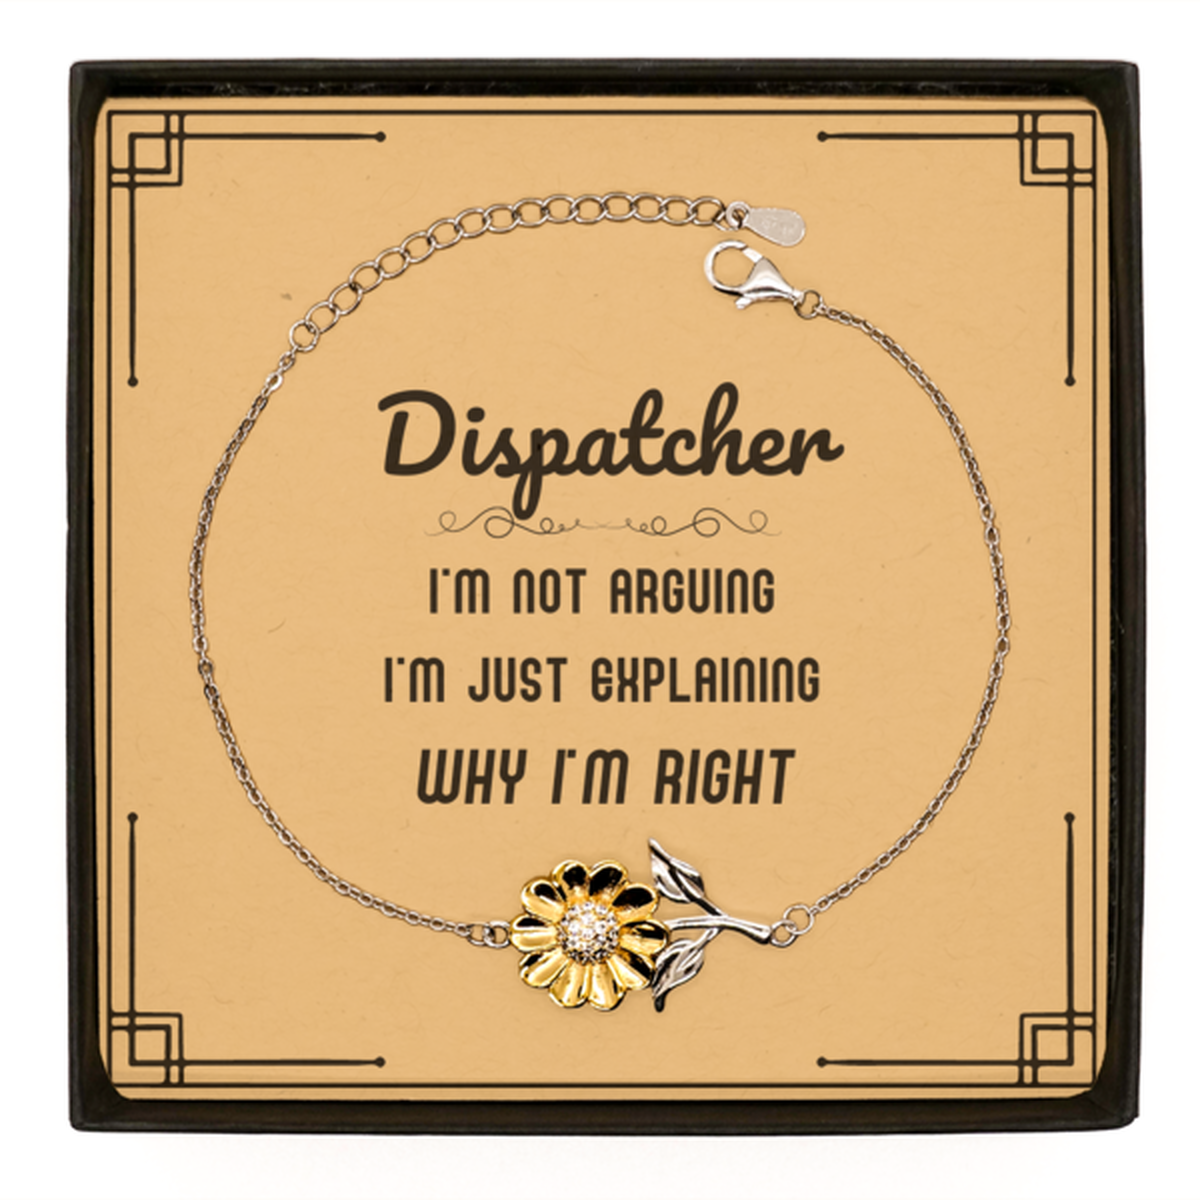 Dispatcher I'm not Arguing. I'm Just Explaining Why I'm RIGHT Sunflower Bracelet, Funny Saying Quote Dispatcher Gifts For Dispatcher Message Card Graduation Birthday Christmas Gifts for Men Women Coworker